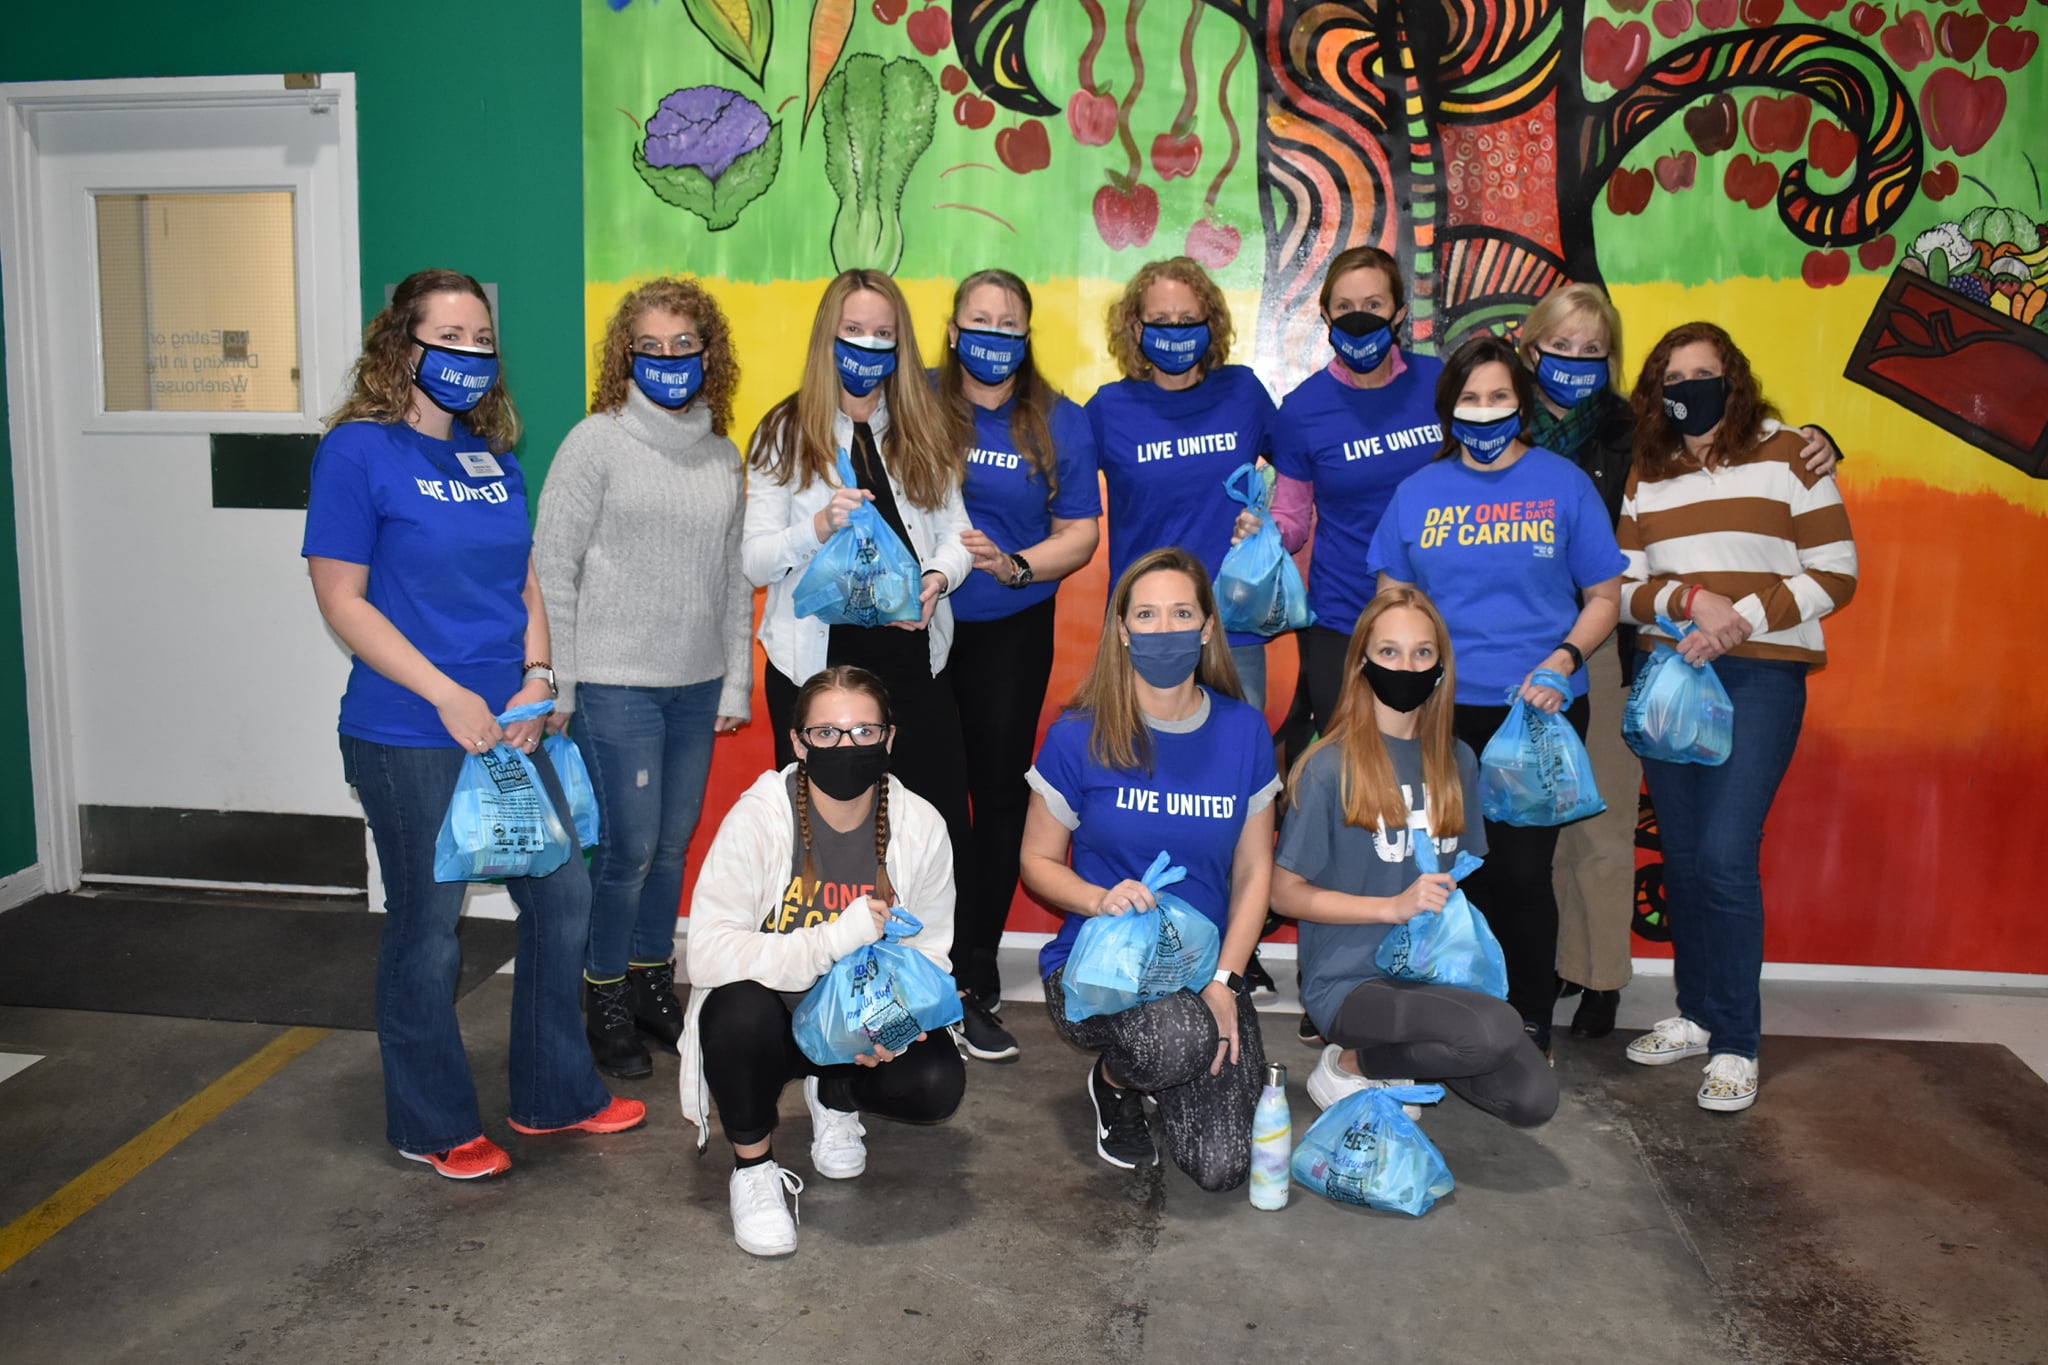 “A group of volunteers wearing Live United masks stands holding blue bags in front of a mural, which features a painted tree and fresh produce.”